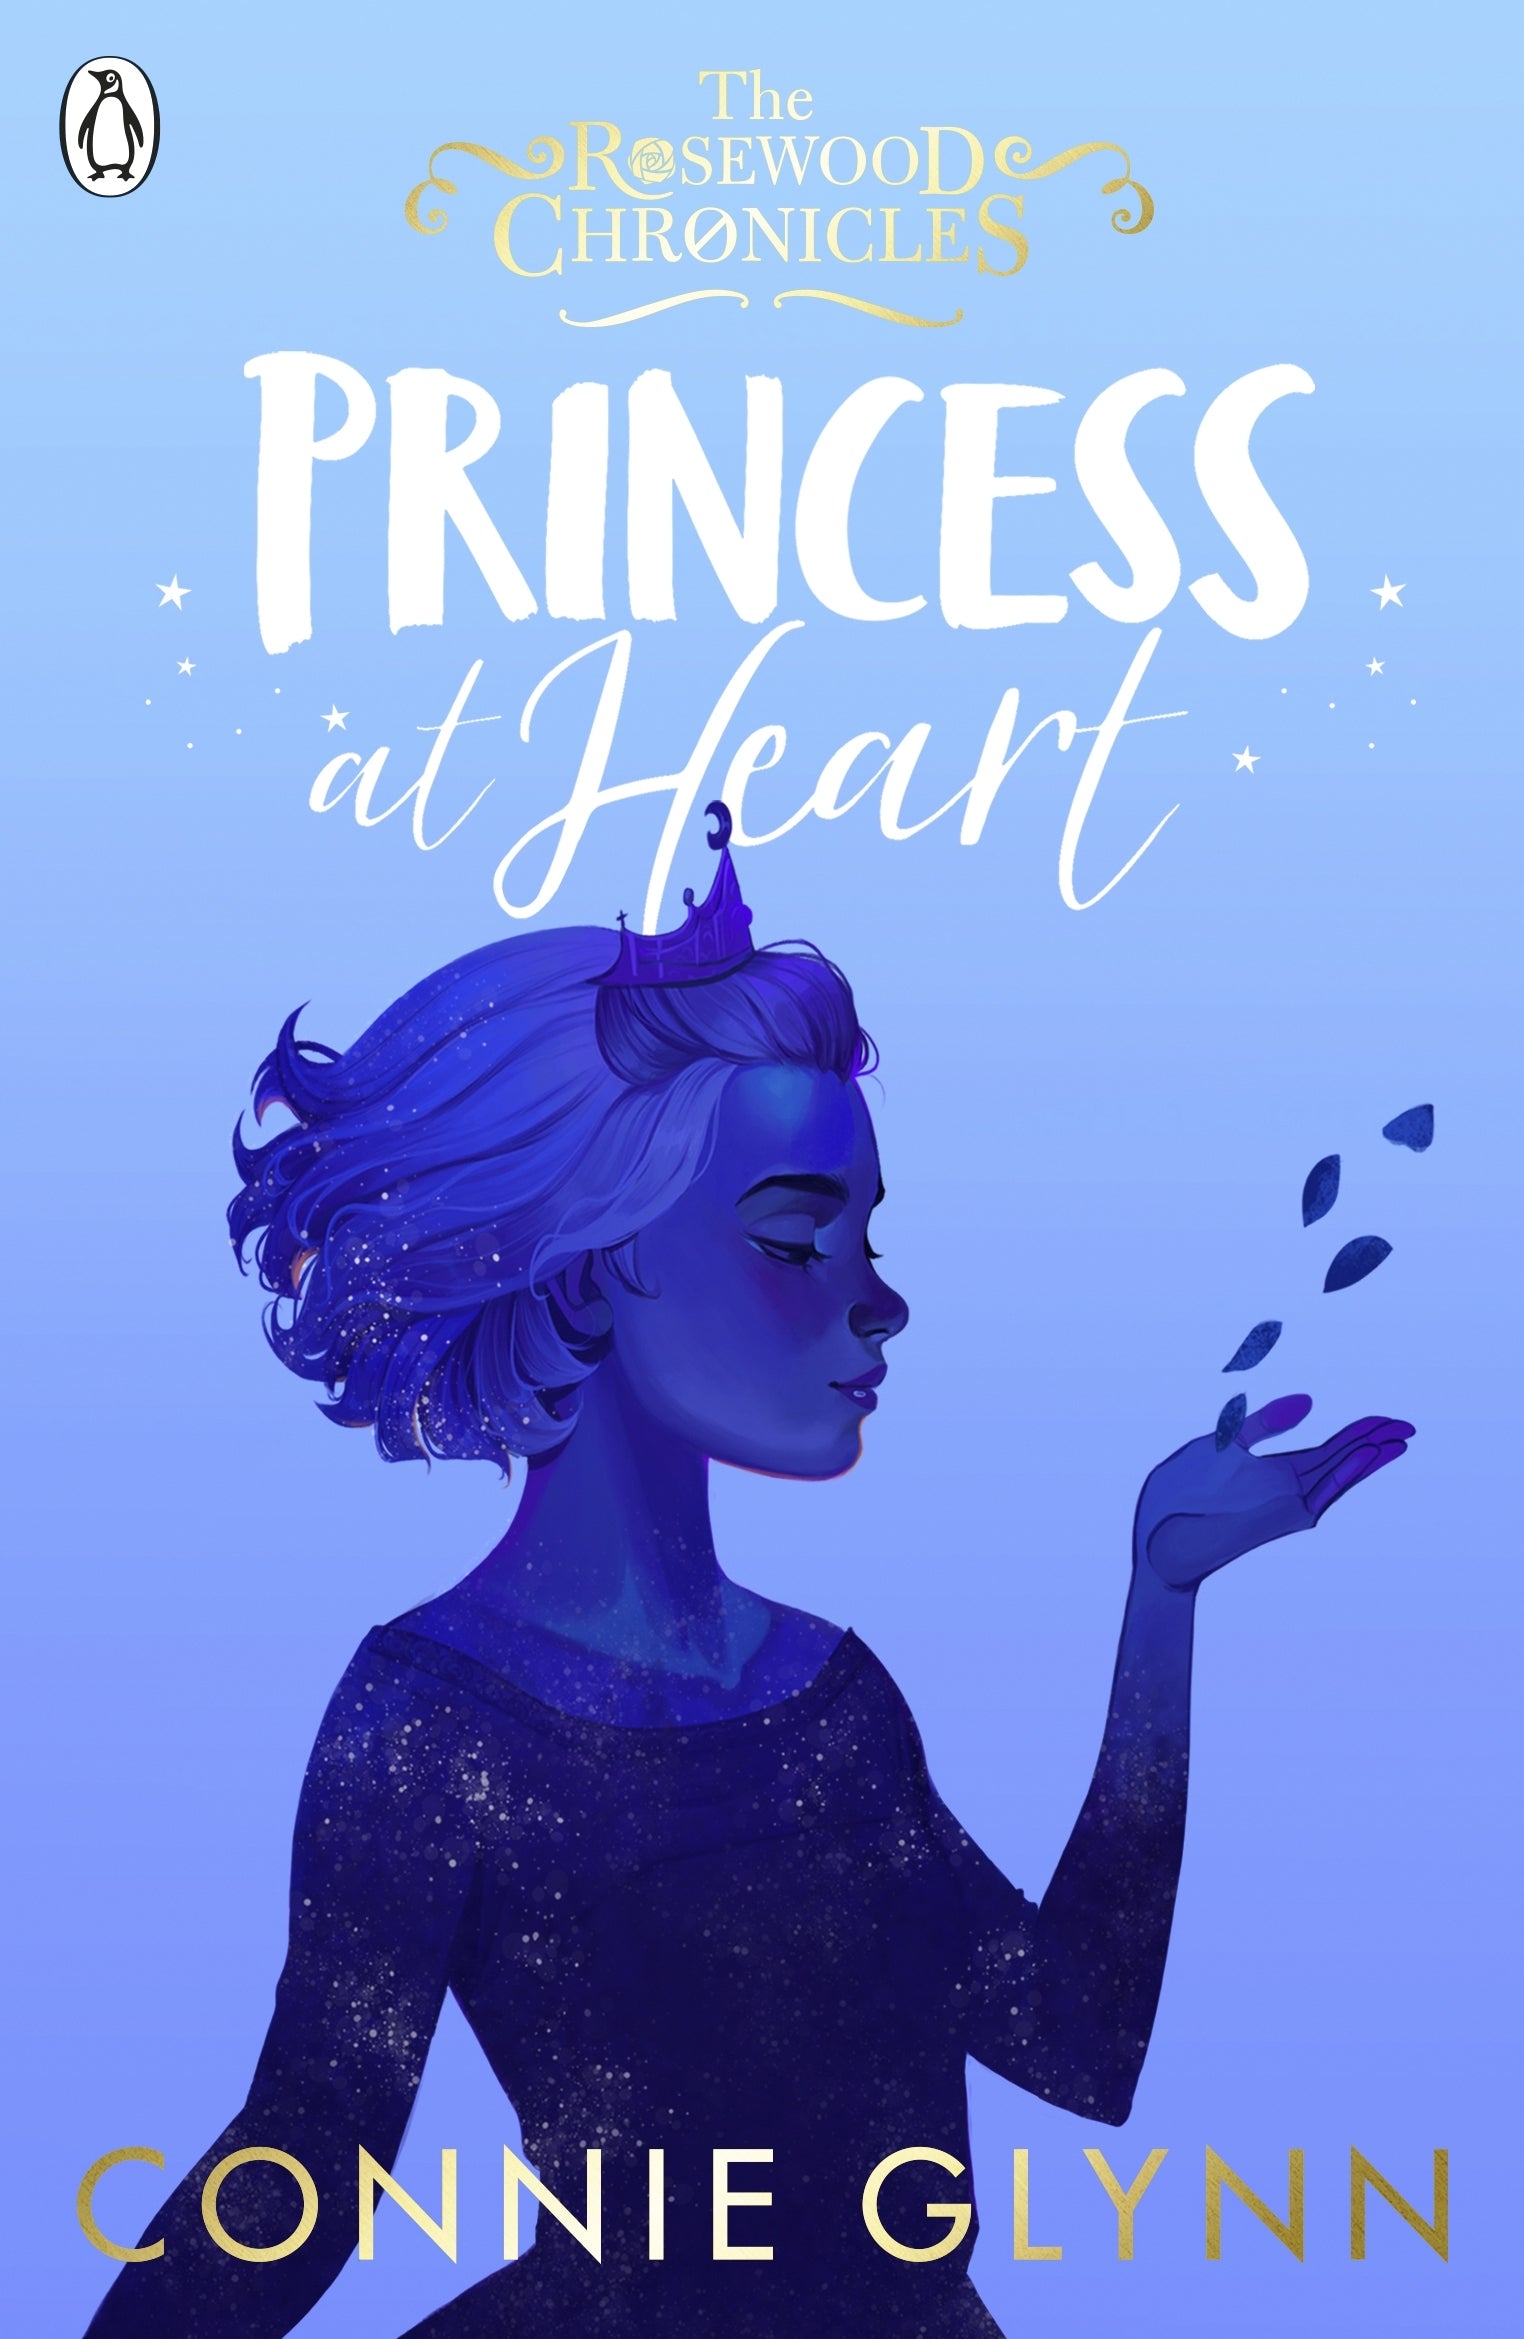 The Rosewood Chronicles#4: Princess at Heart by Connie Glynn